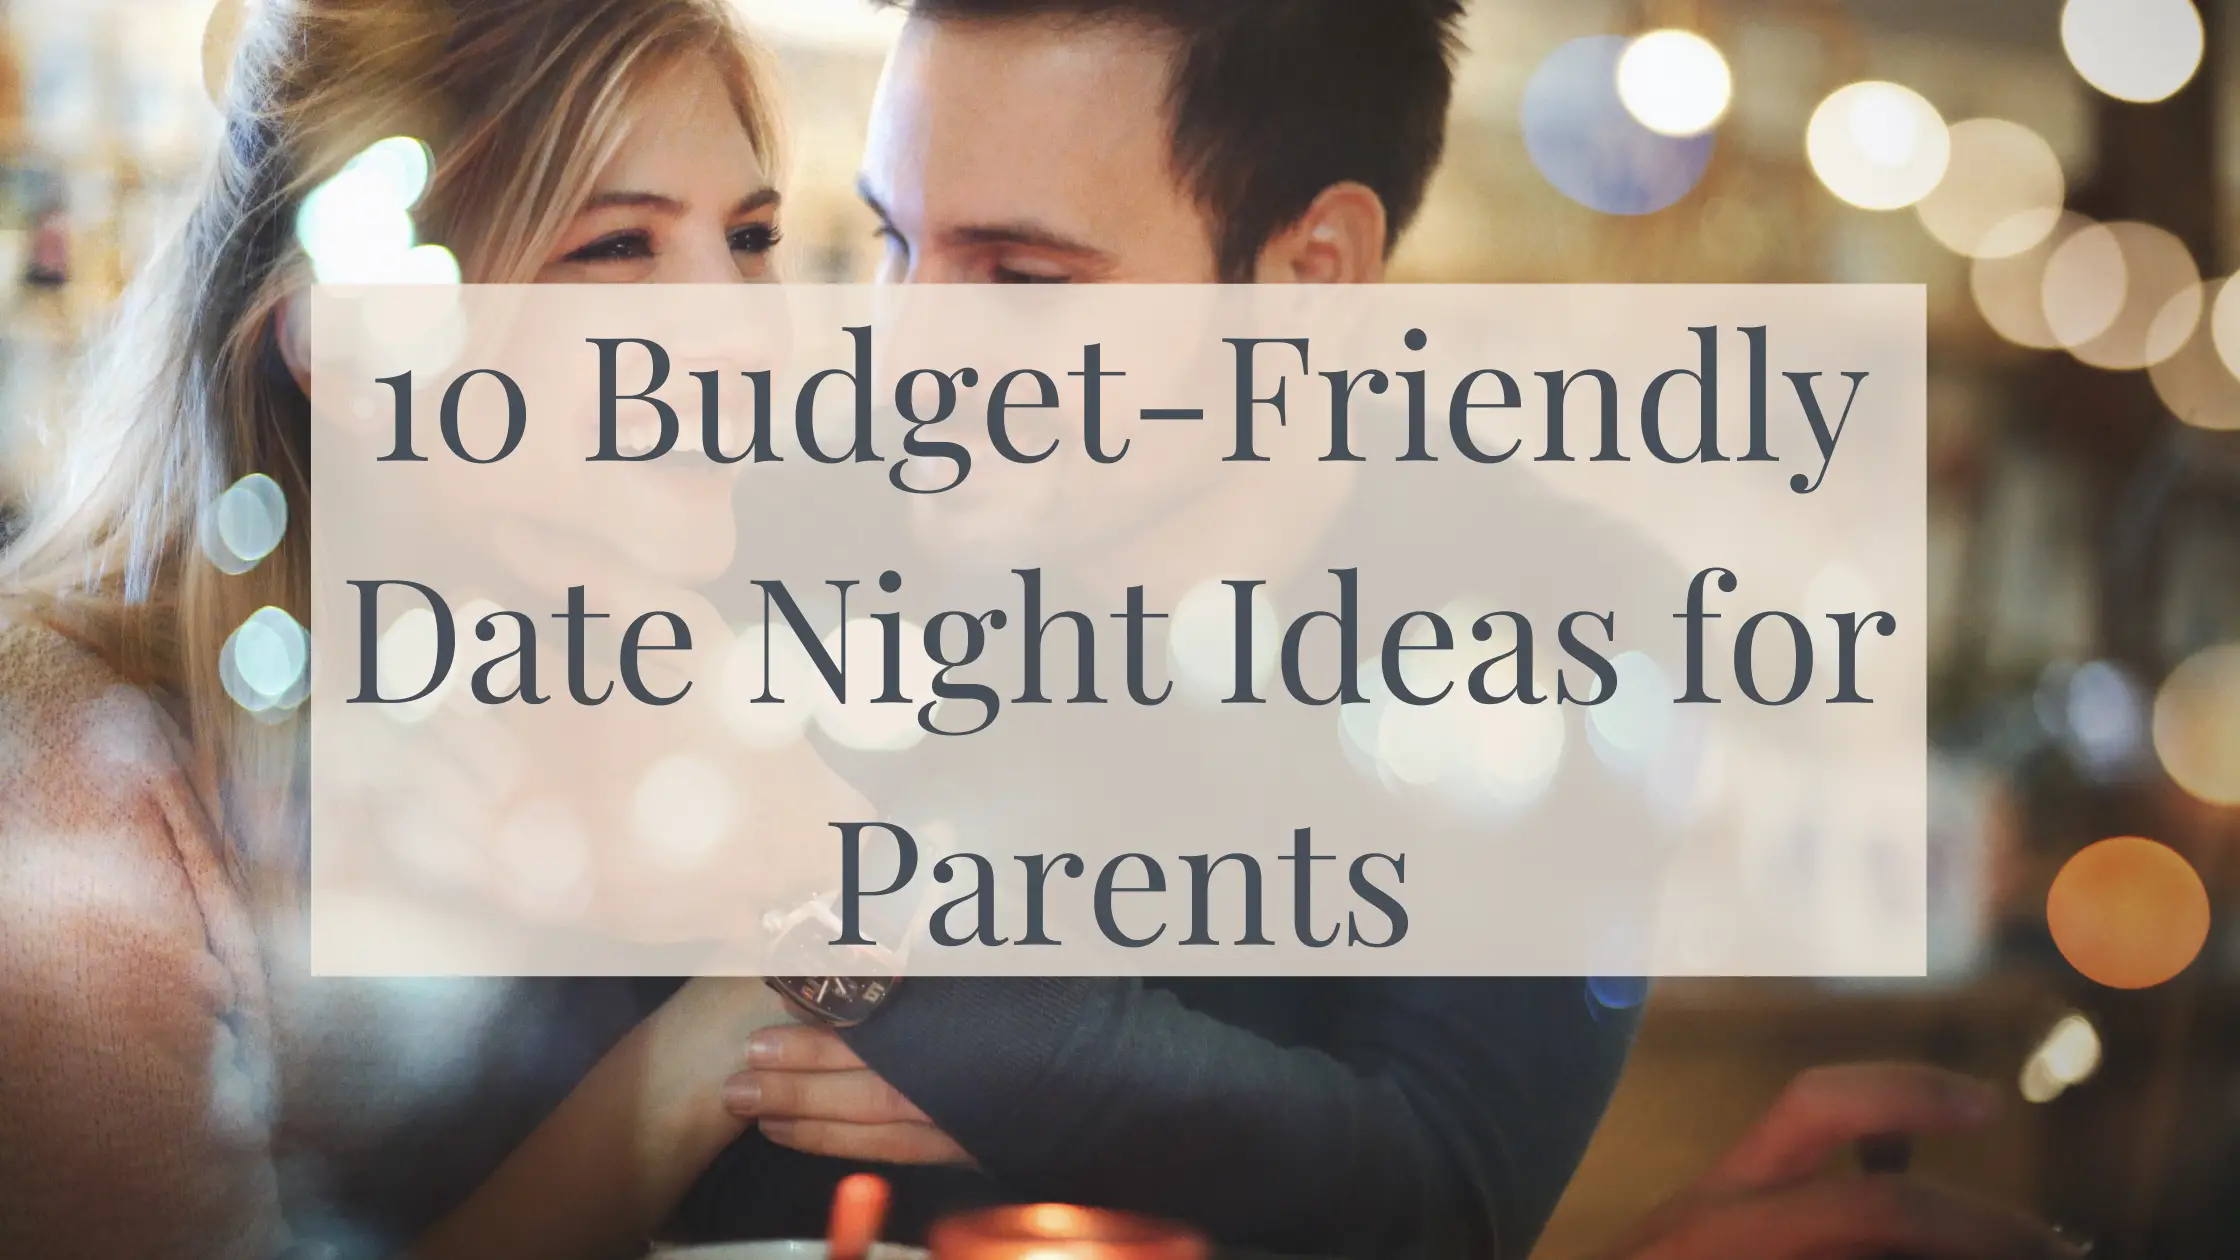 10 Budget-Friendly Date Night Ideas for Parents